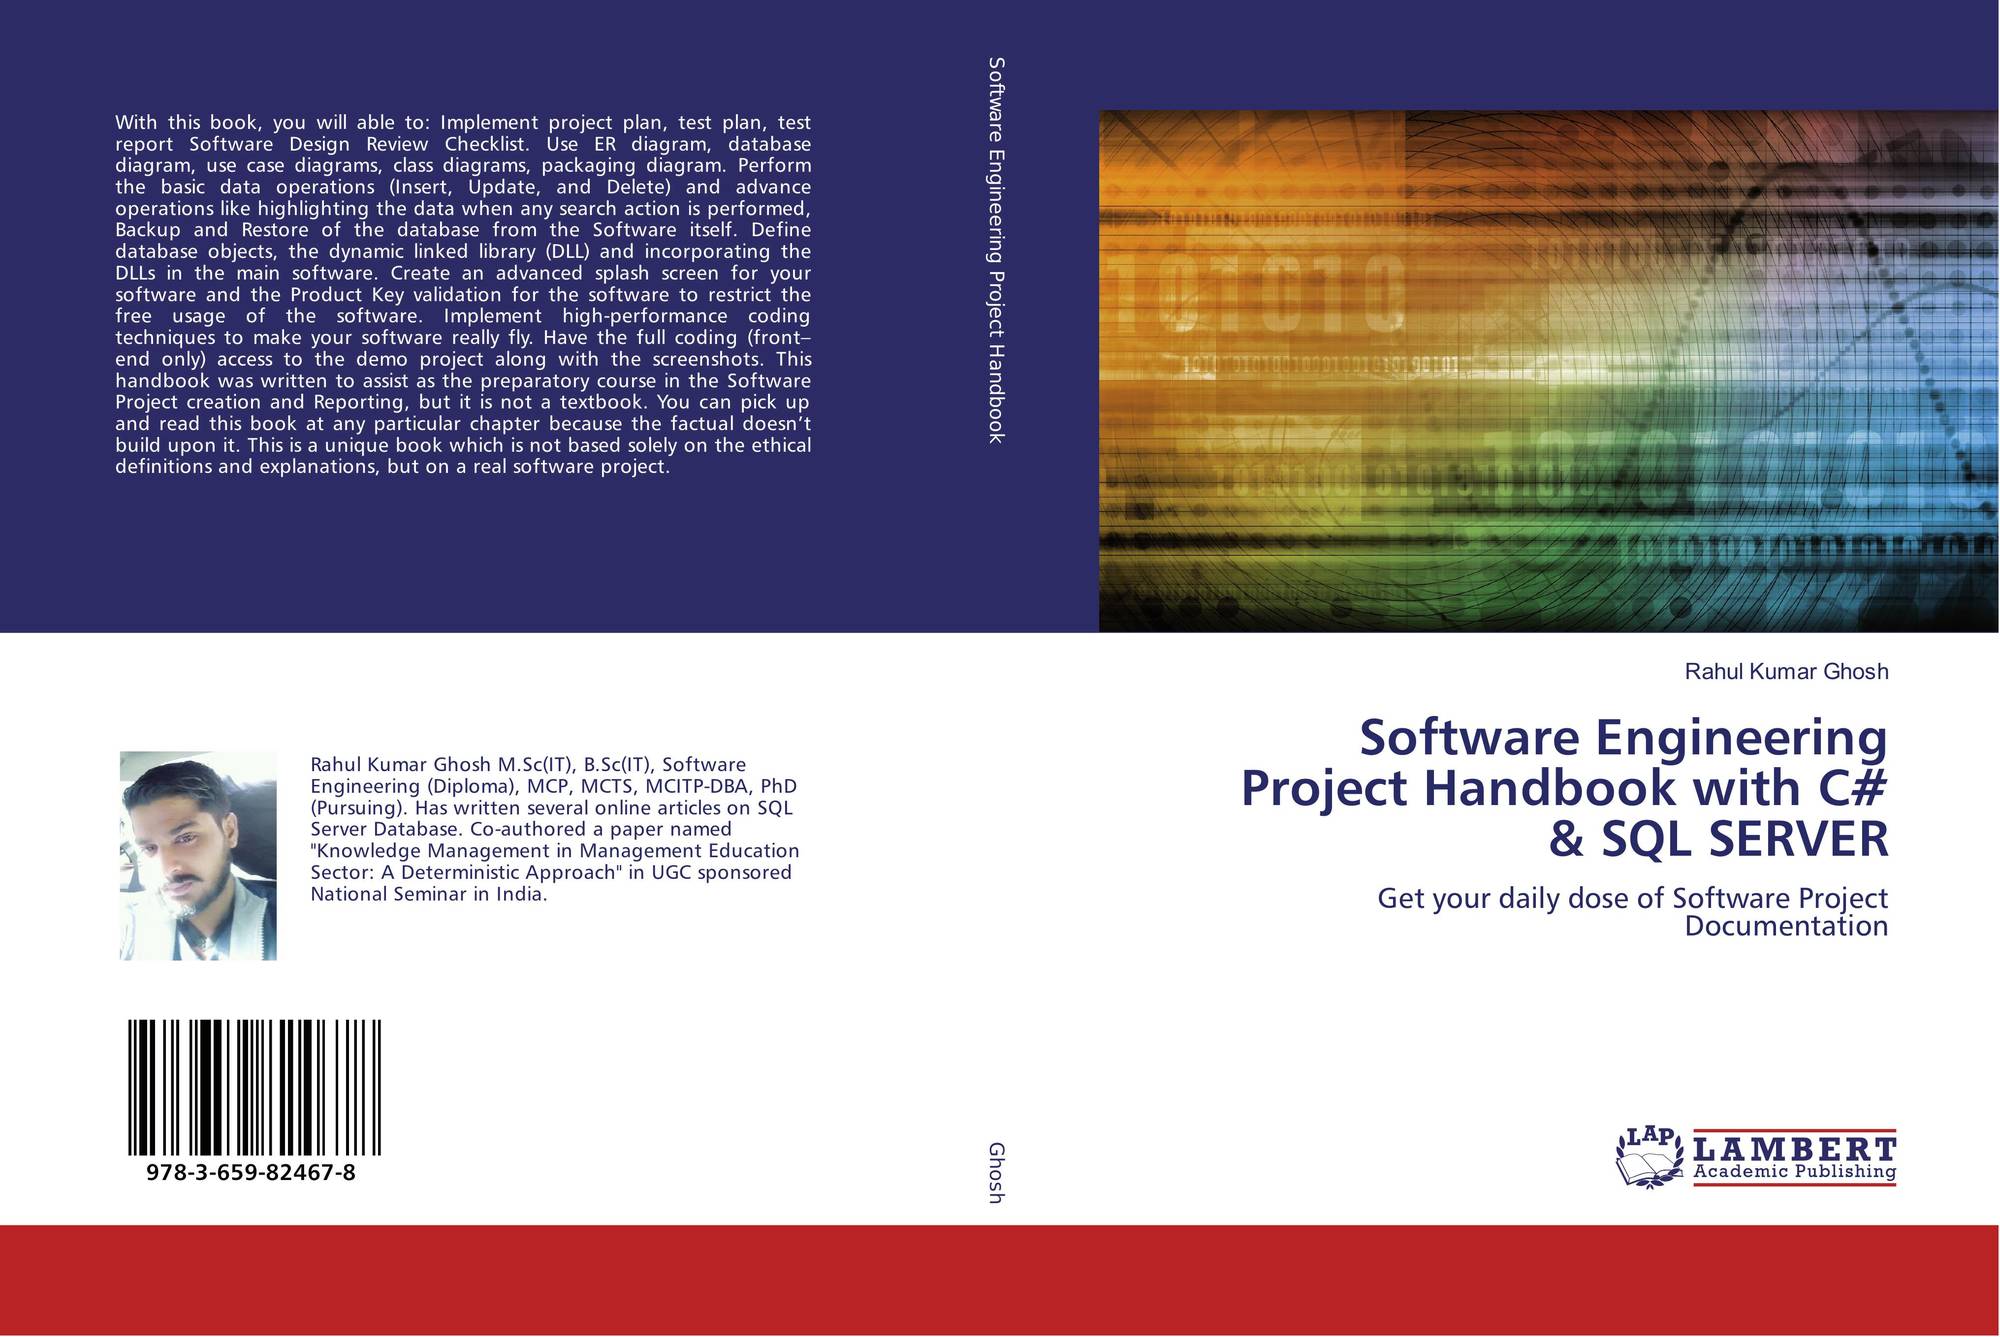 thesis project for software engineering